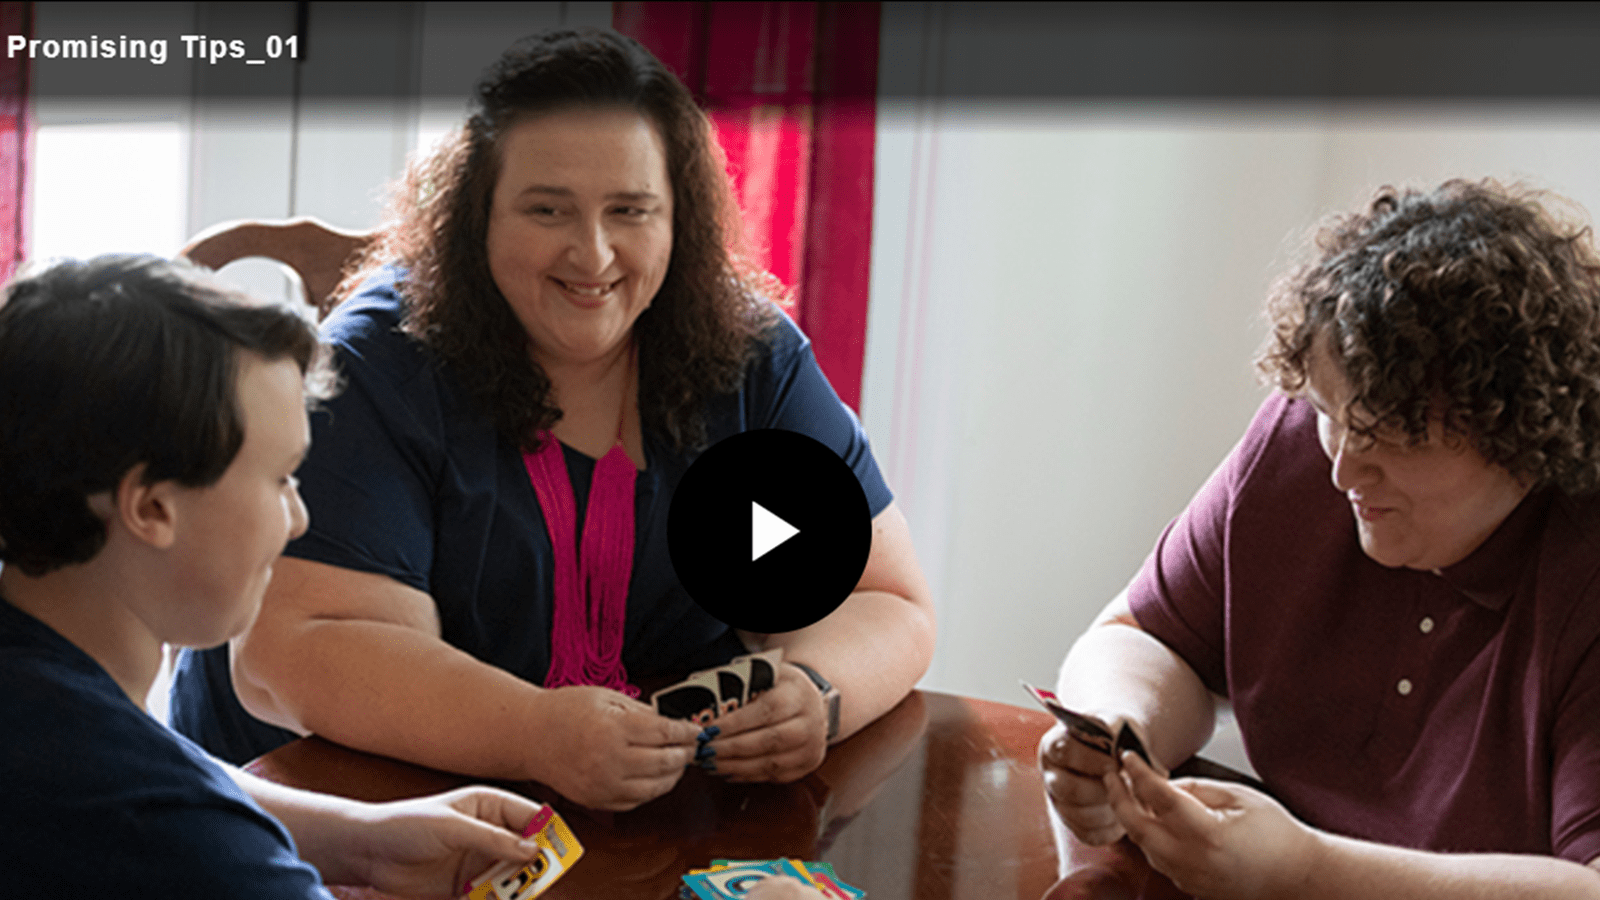 Machelle and her teen sons play a card game